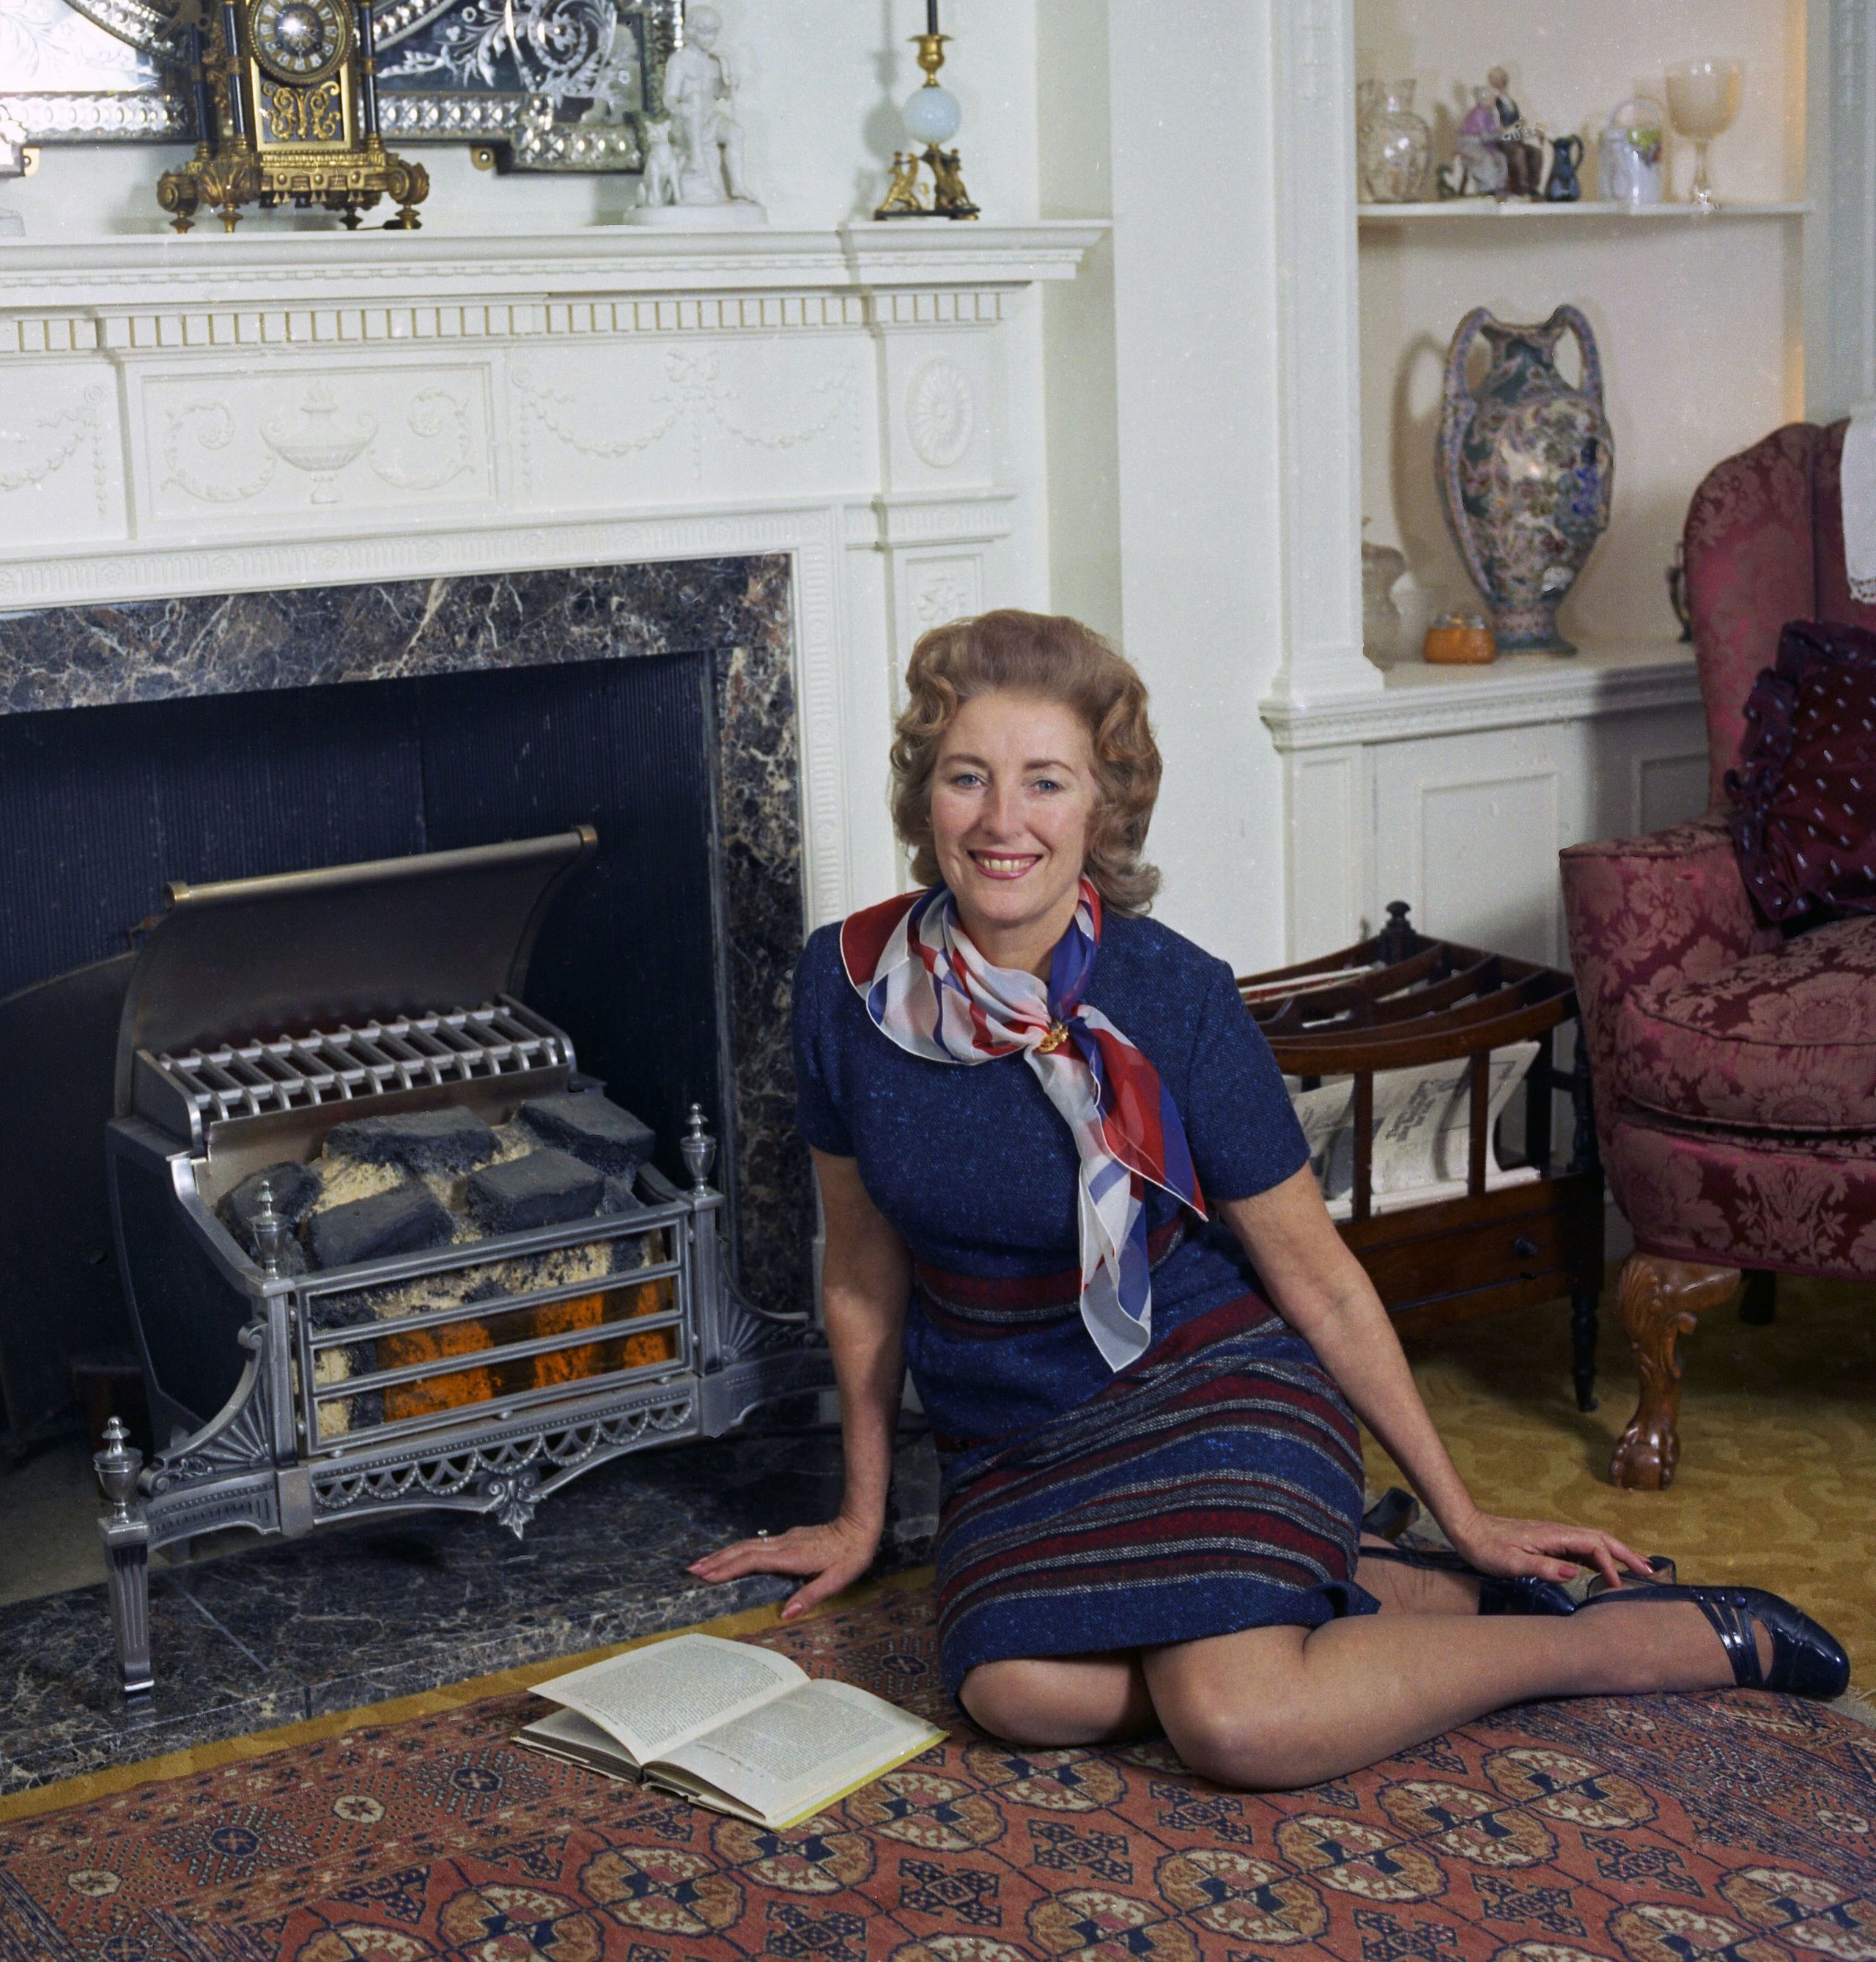 Dame Vera Lynn, "at home in Sussex." Date unknown. Image Wikipedia.